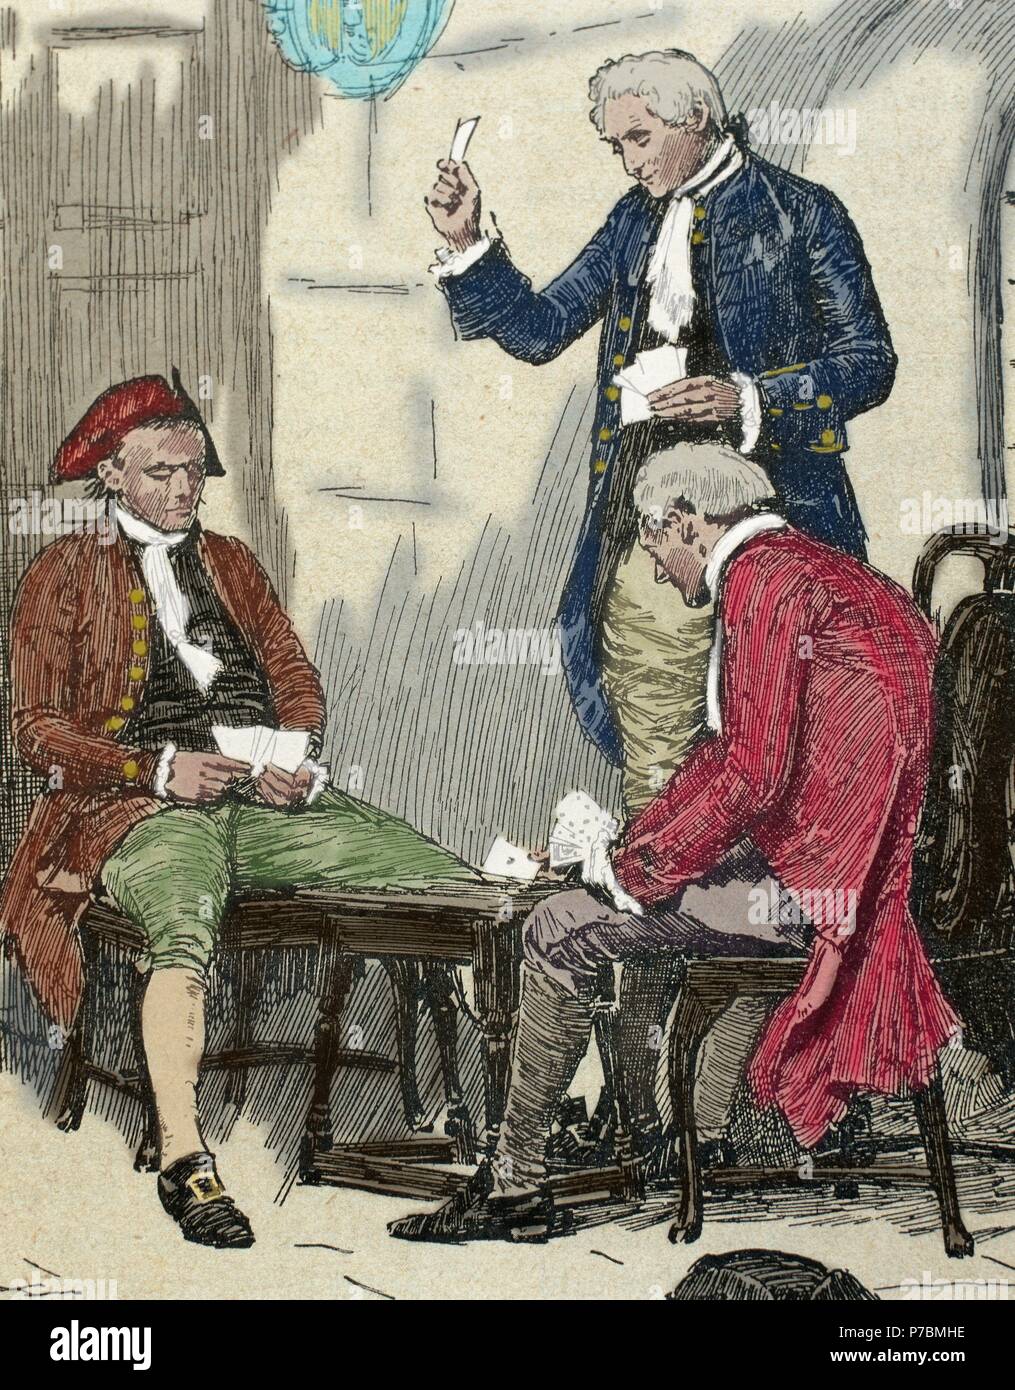 French revolution. 1789-1799. Count of Ferrers playing cards with his jailers before his execution. Engraving.19th century. Colored. Stock Photo